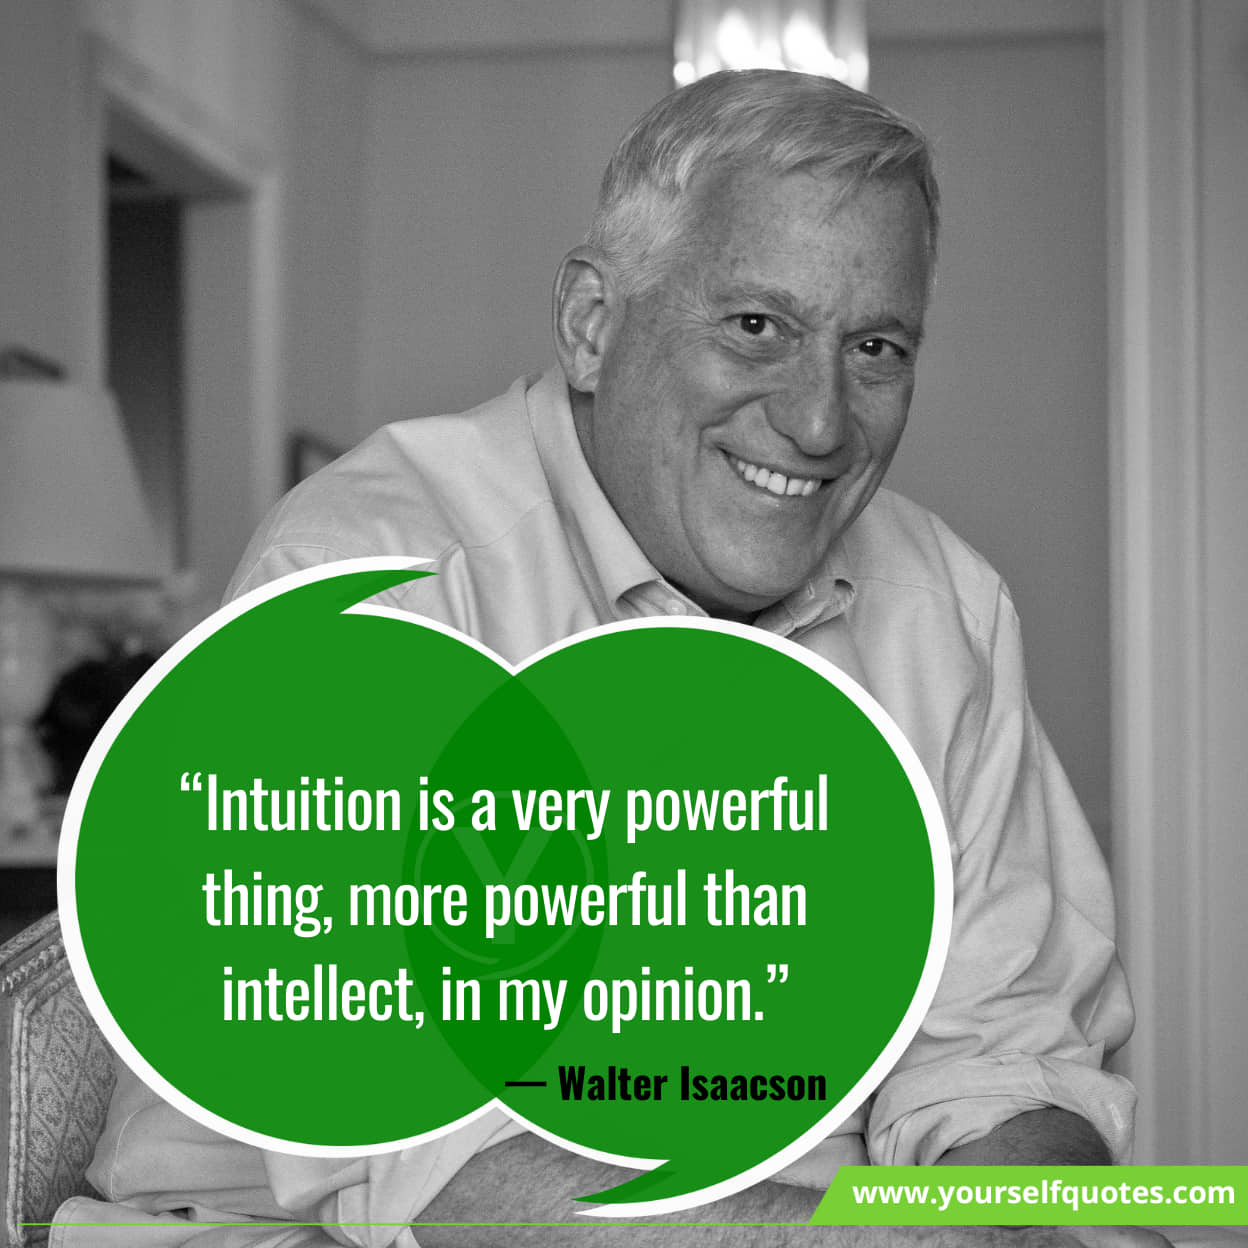 Walter Isaacson Quotes For Life